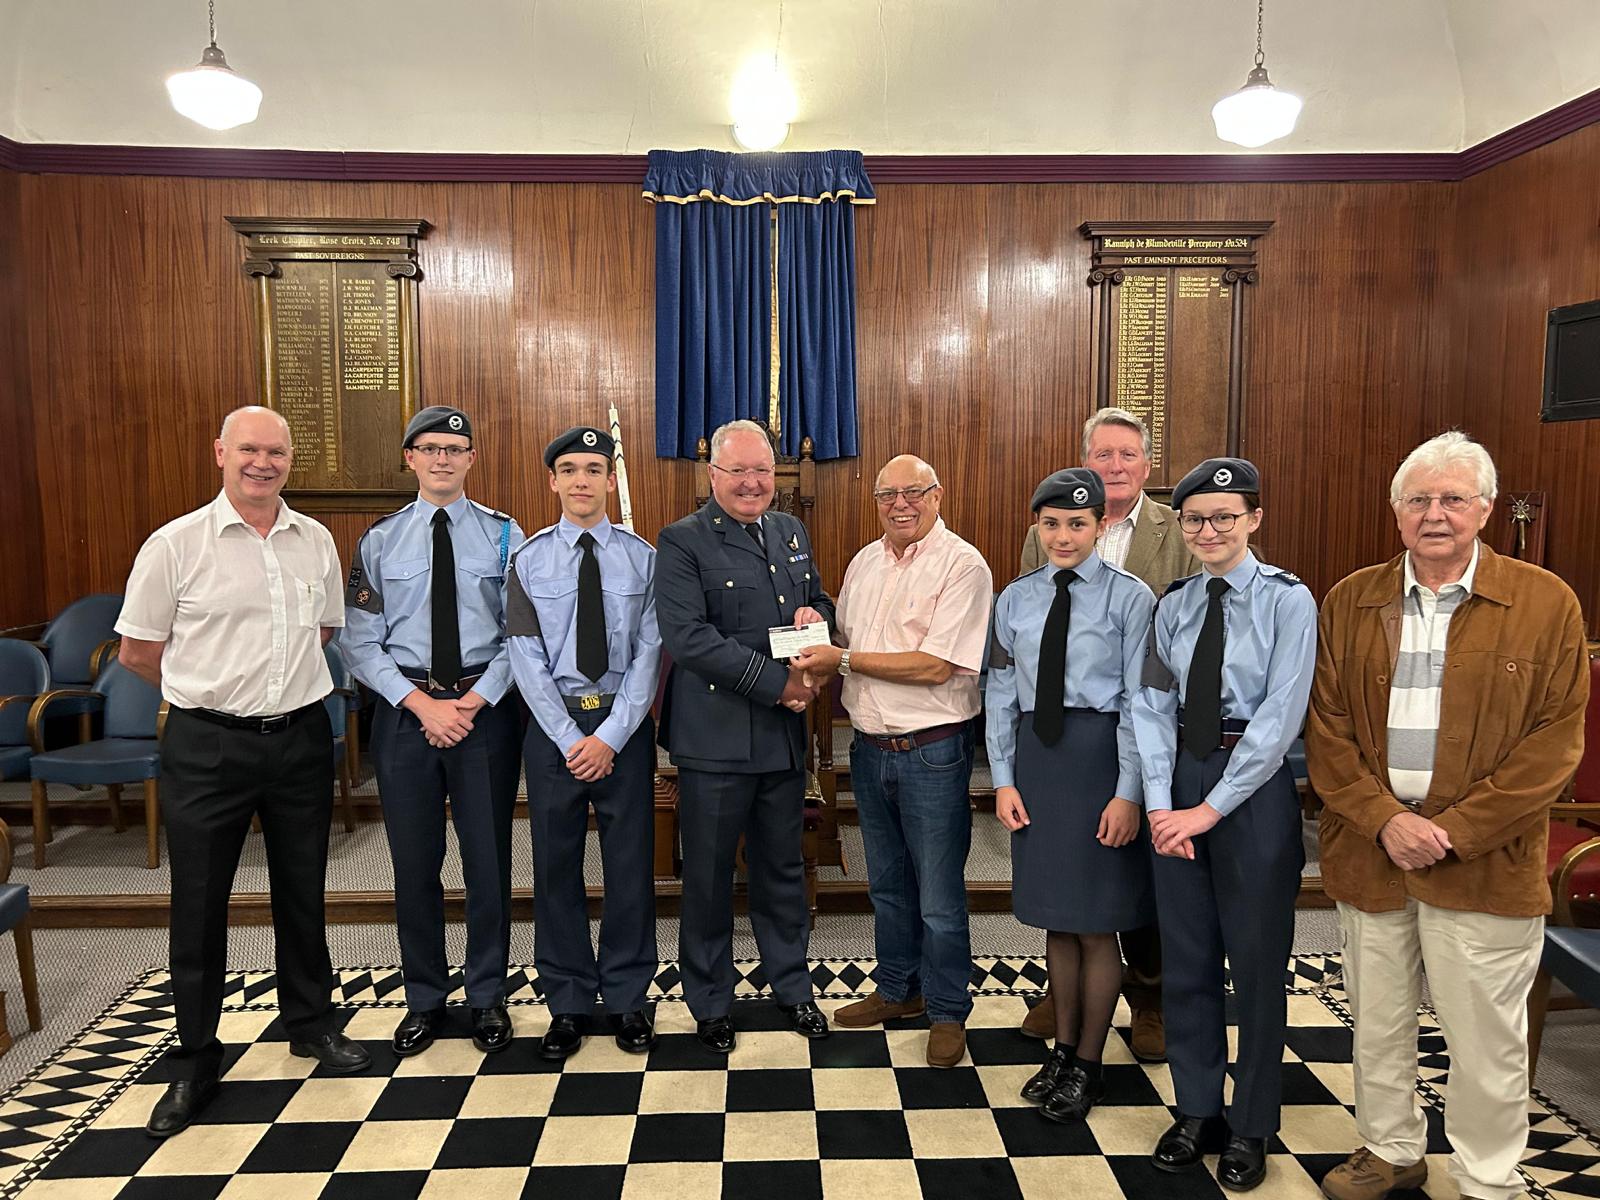 Members of 60 Leek Squadron Air Cadets receive a donation from Staffordshire Freemasons in the setting of the Leek Masonic Hall